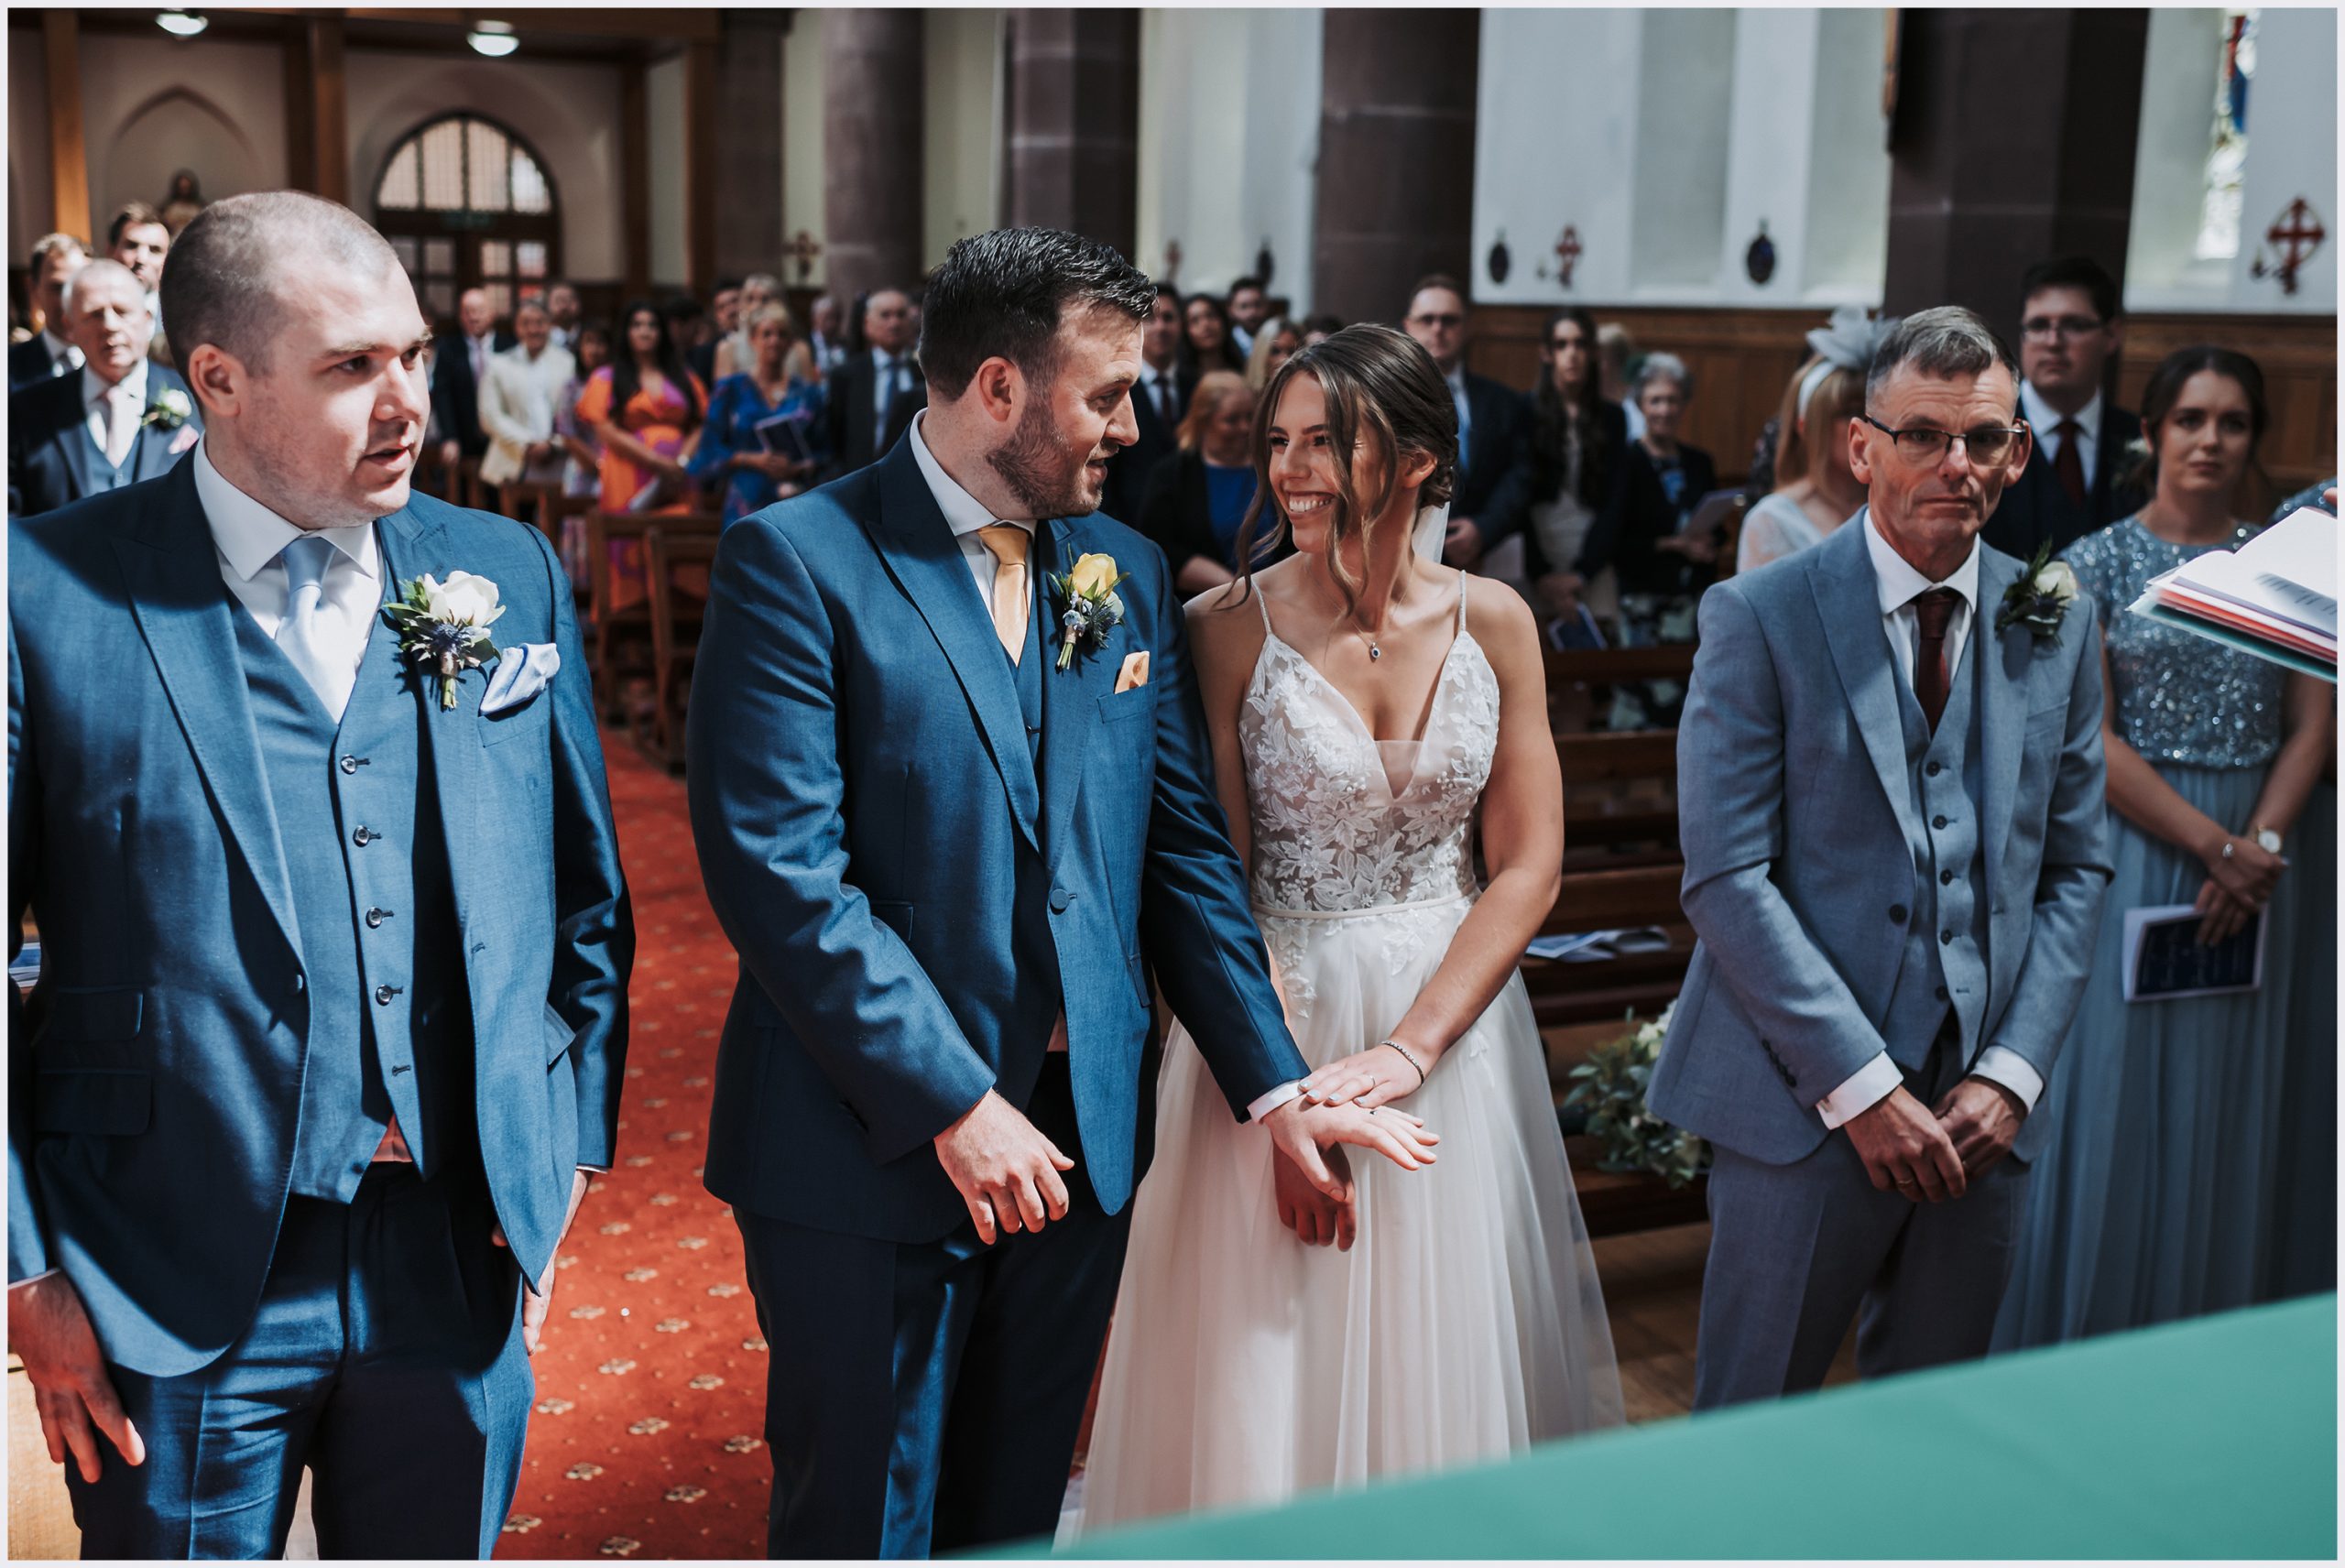 A bride and groom smile and look into each other's eyes during their church wedding ceremony.  Image captured by wedding photographer Helena Jayne Photography